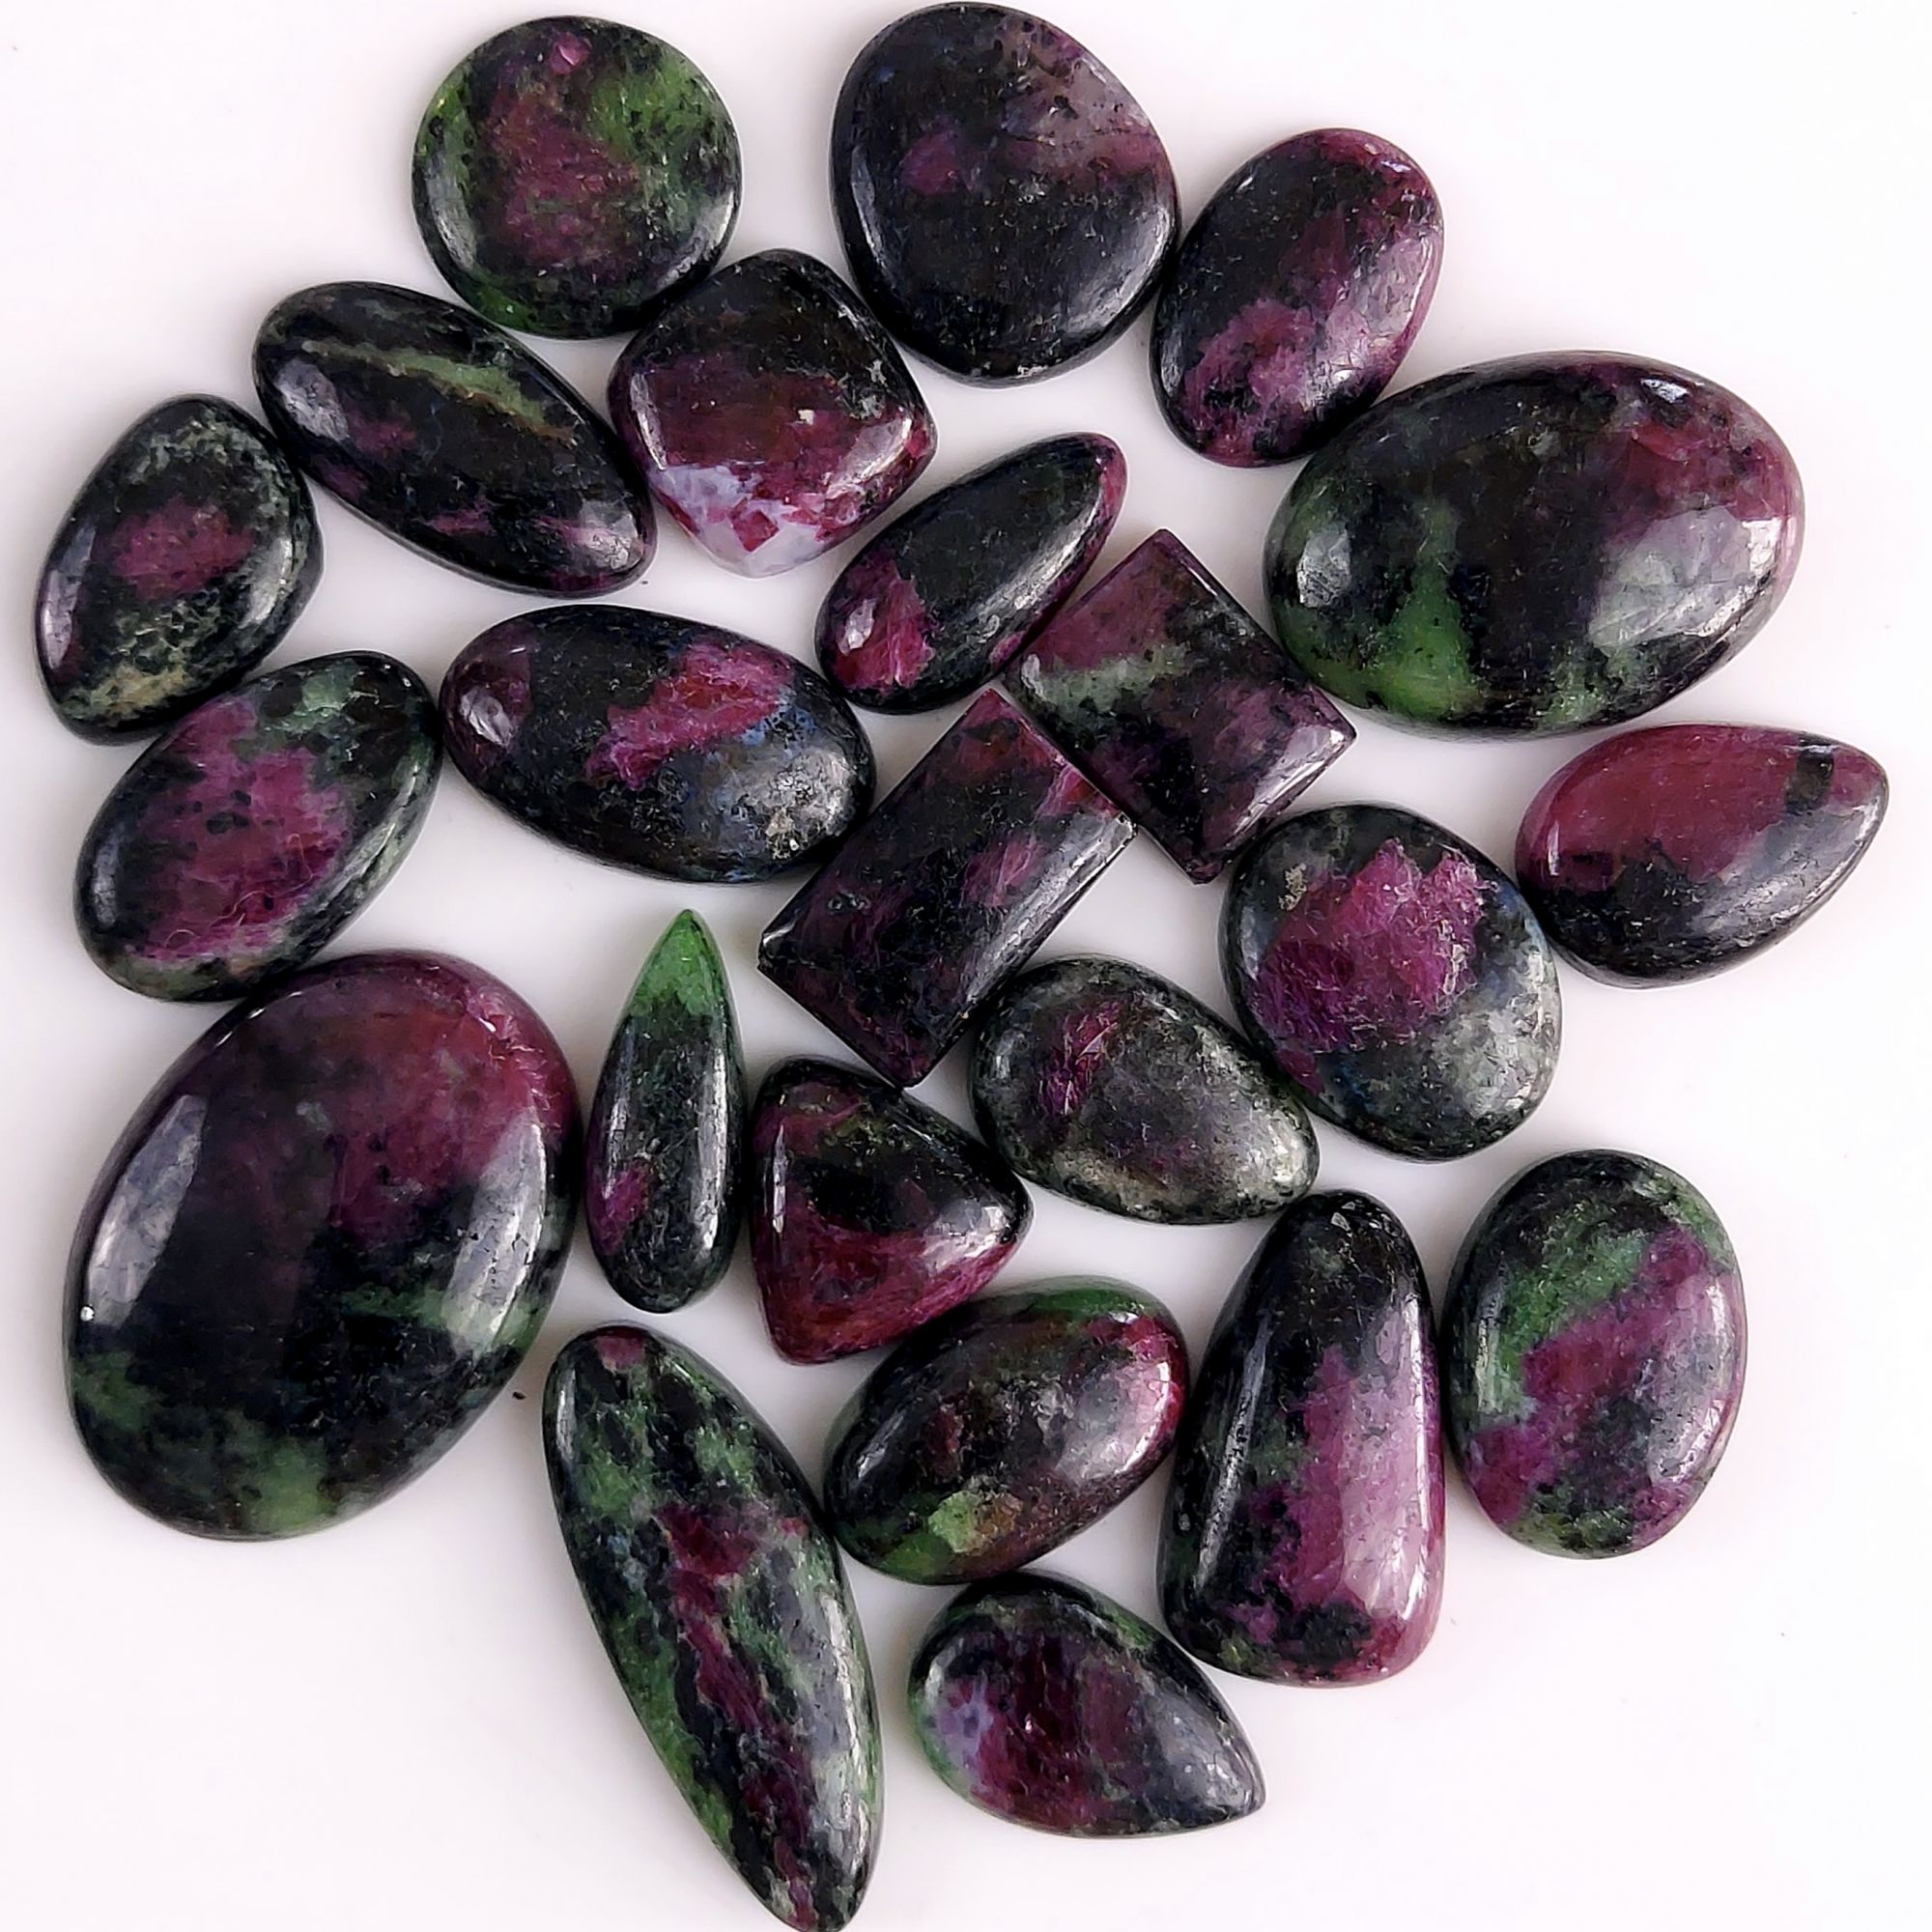 23Pcs 490Cts Natural Ruby in Zoisite Cabochon Loose Gemstone Back unpolished  30x22 11x10mm#472